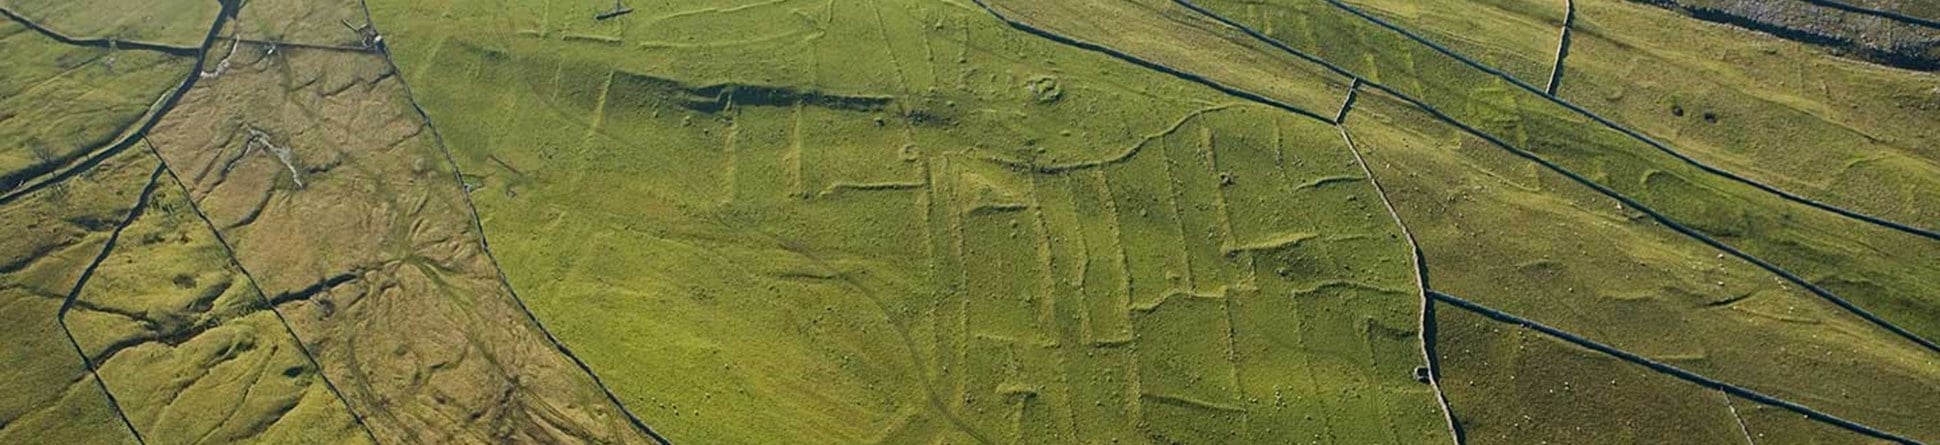 Colour aerial photo showing upland moors divided by dry stone walls with an underlying pattern of regular banks forming fields